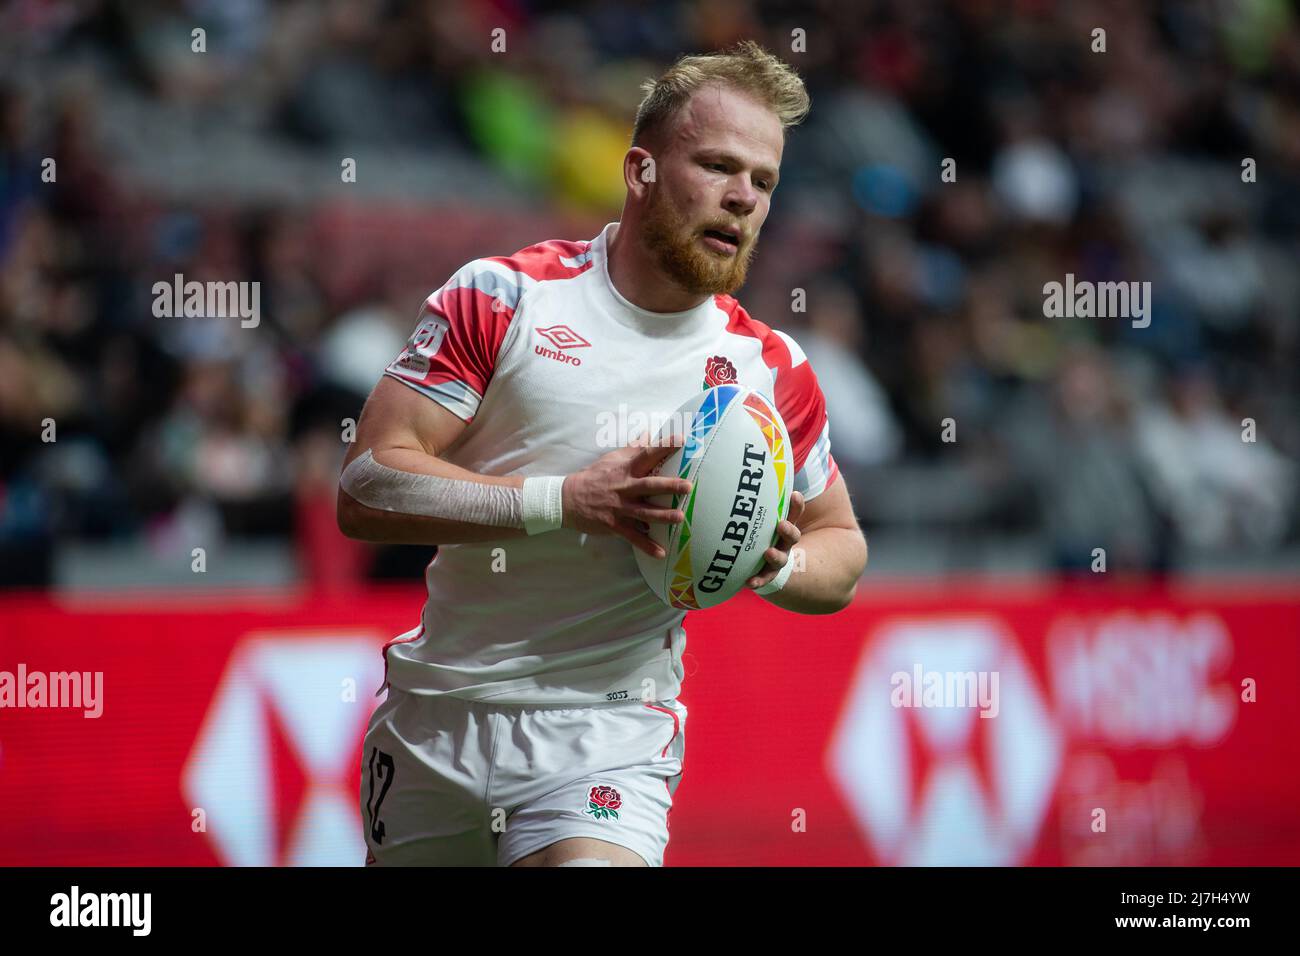 Vancouver, Canada, April 17, 2022: Will Homer of Team England 7s in action during the match against Team New Zealand 7s on Day 2 of the HSBC Canada Sevens at BC Place in Vancouver, Canada. New Zealand won the match with the score 34-5. Stock Photo